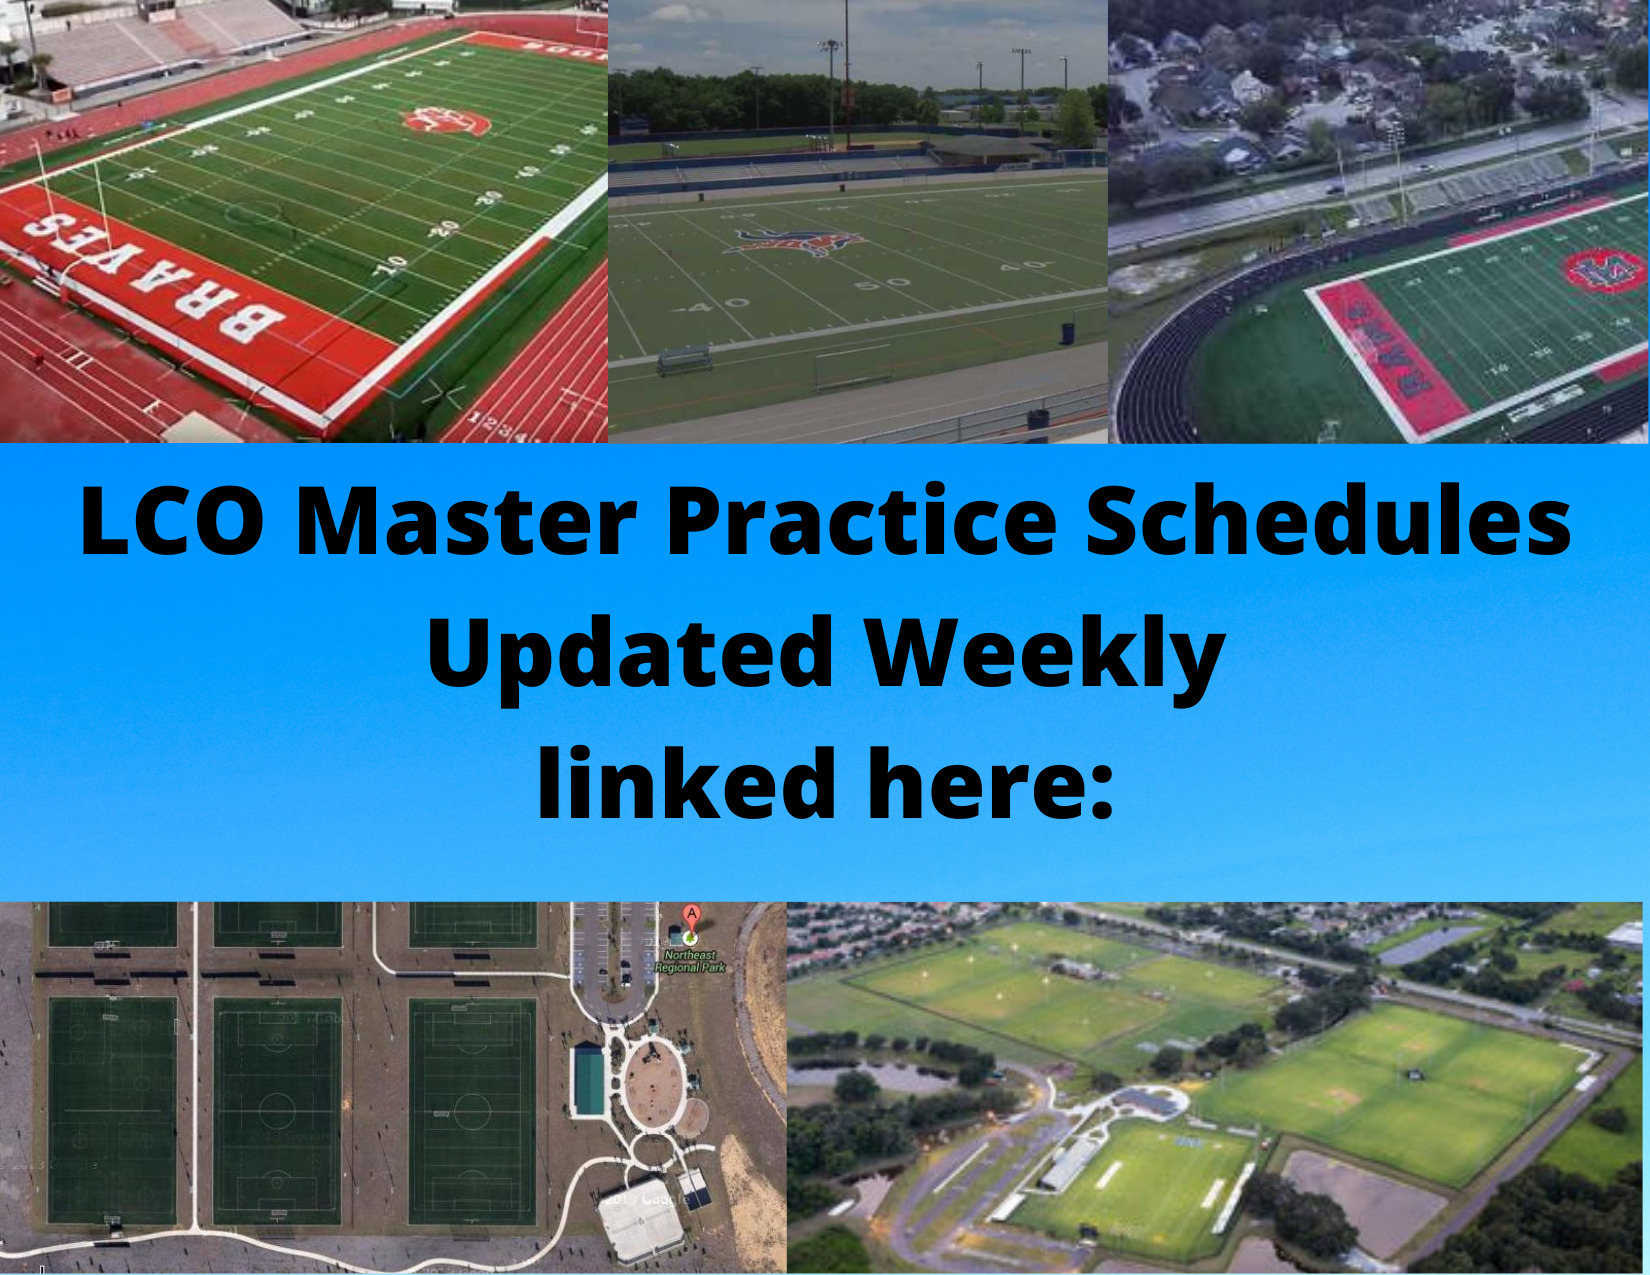 Edited LCO Practice Schedules Updated Weekly Linked (1)